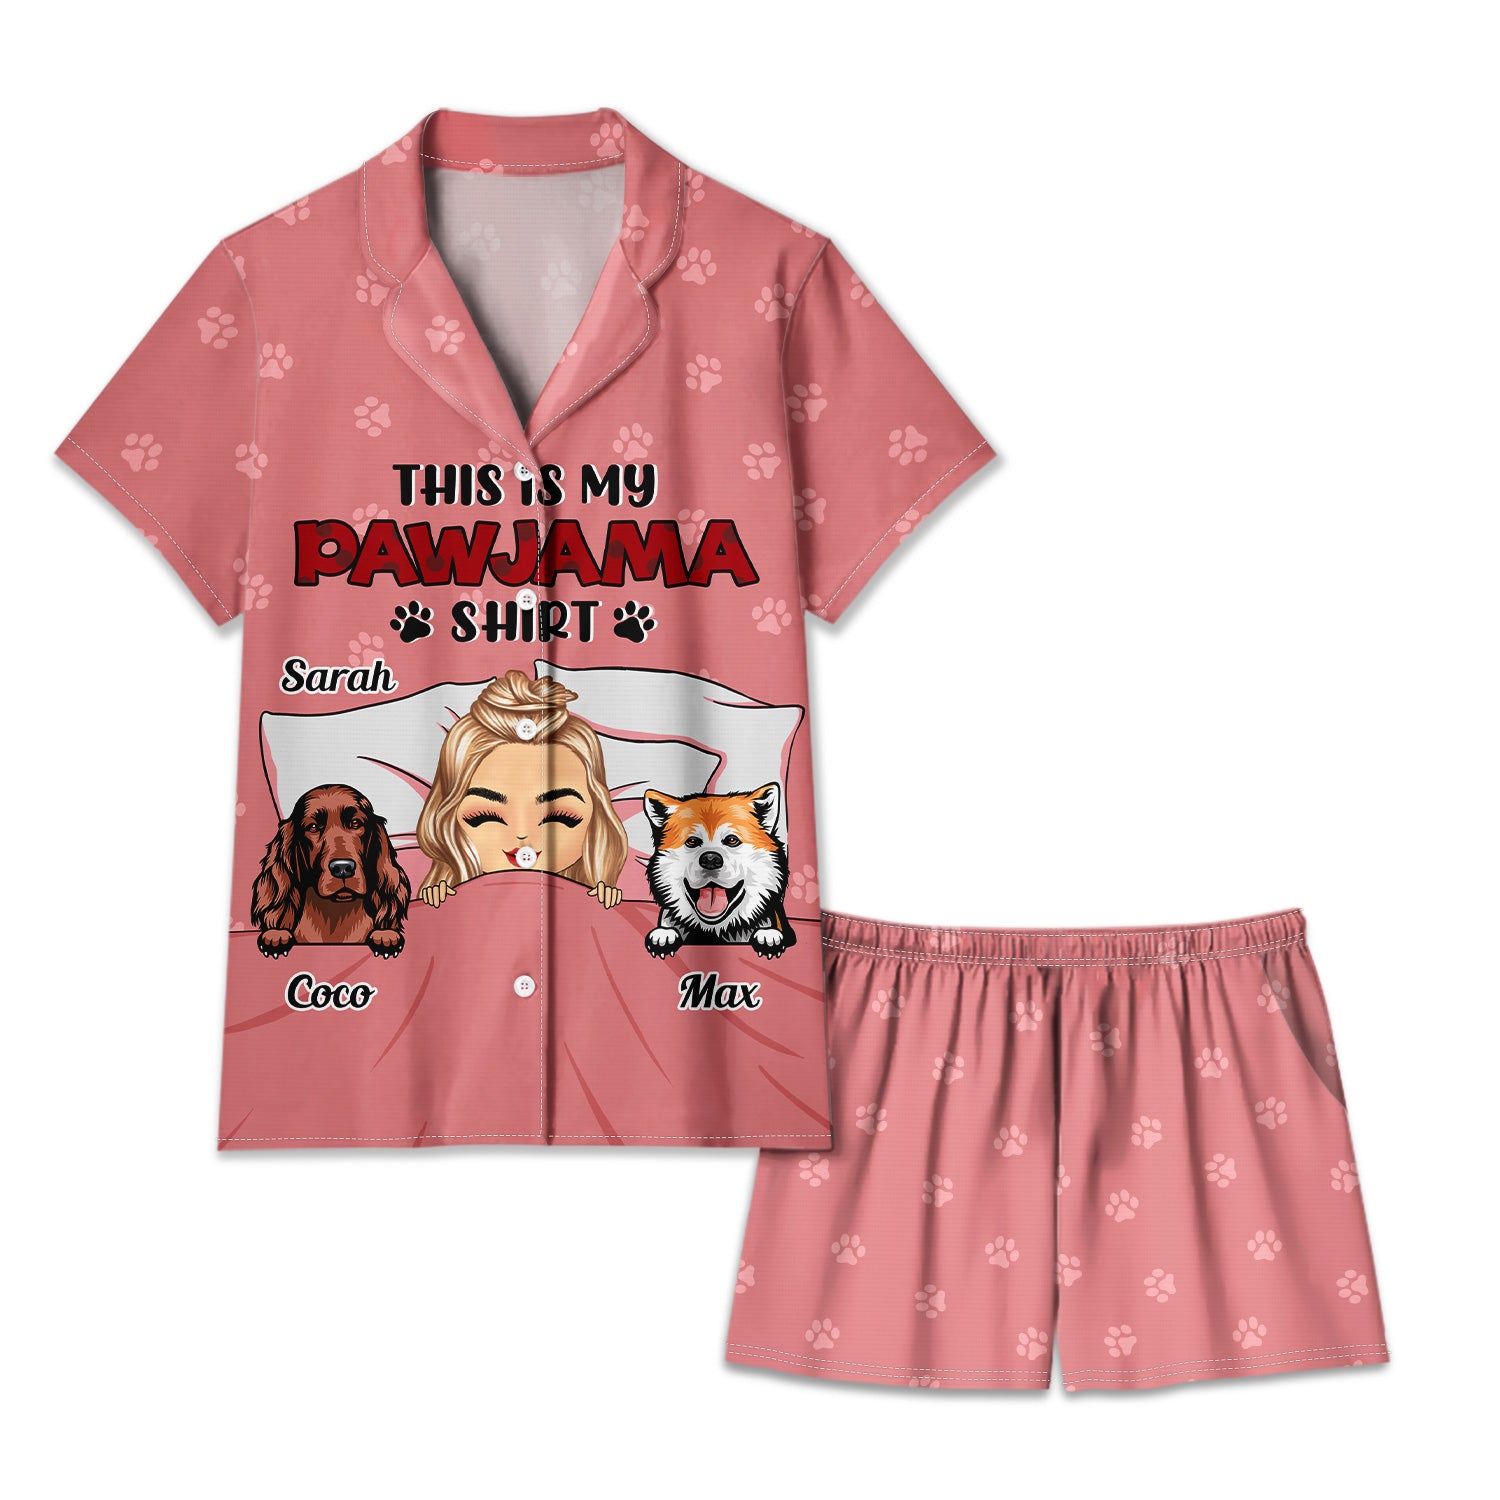 This Is My Pawjama Shirt - Gift For Dog Lovers, Dog Moms, Dog Dads - Personalized Short Pajamas Set